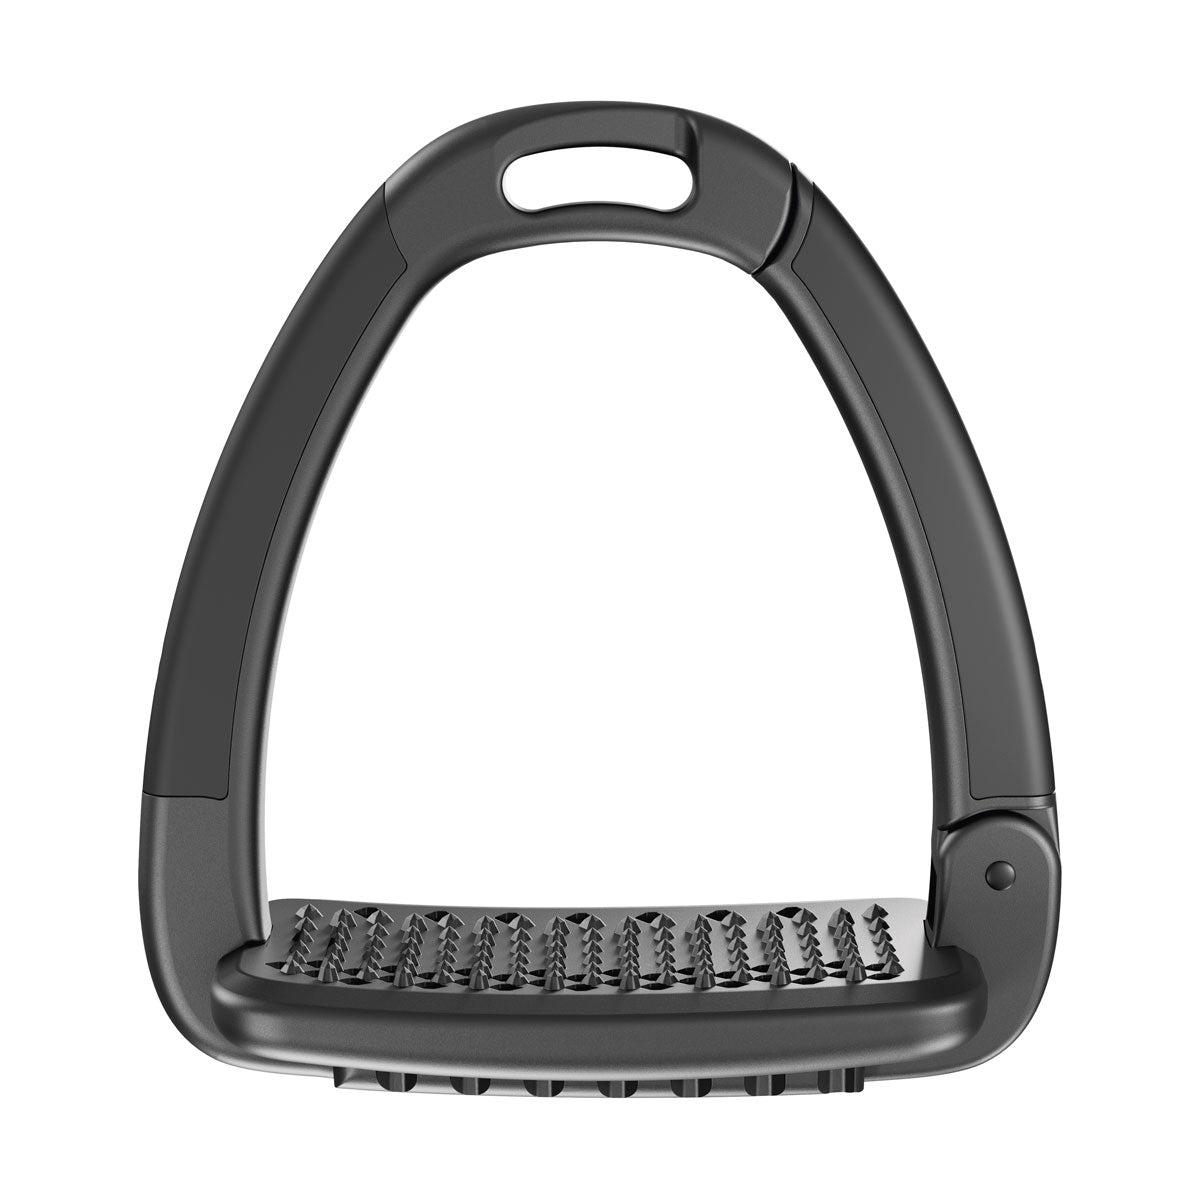 Horsena Swap Stirrups with Double Side Covers Safety Stirrups Barnstaple Equestrian Supplies